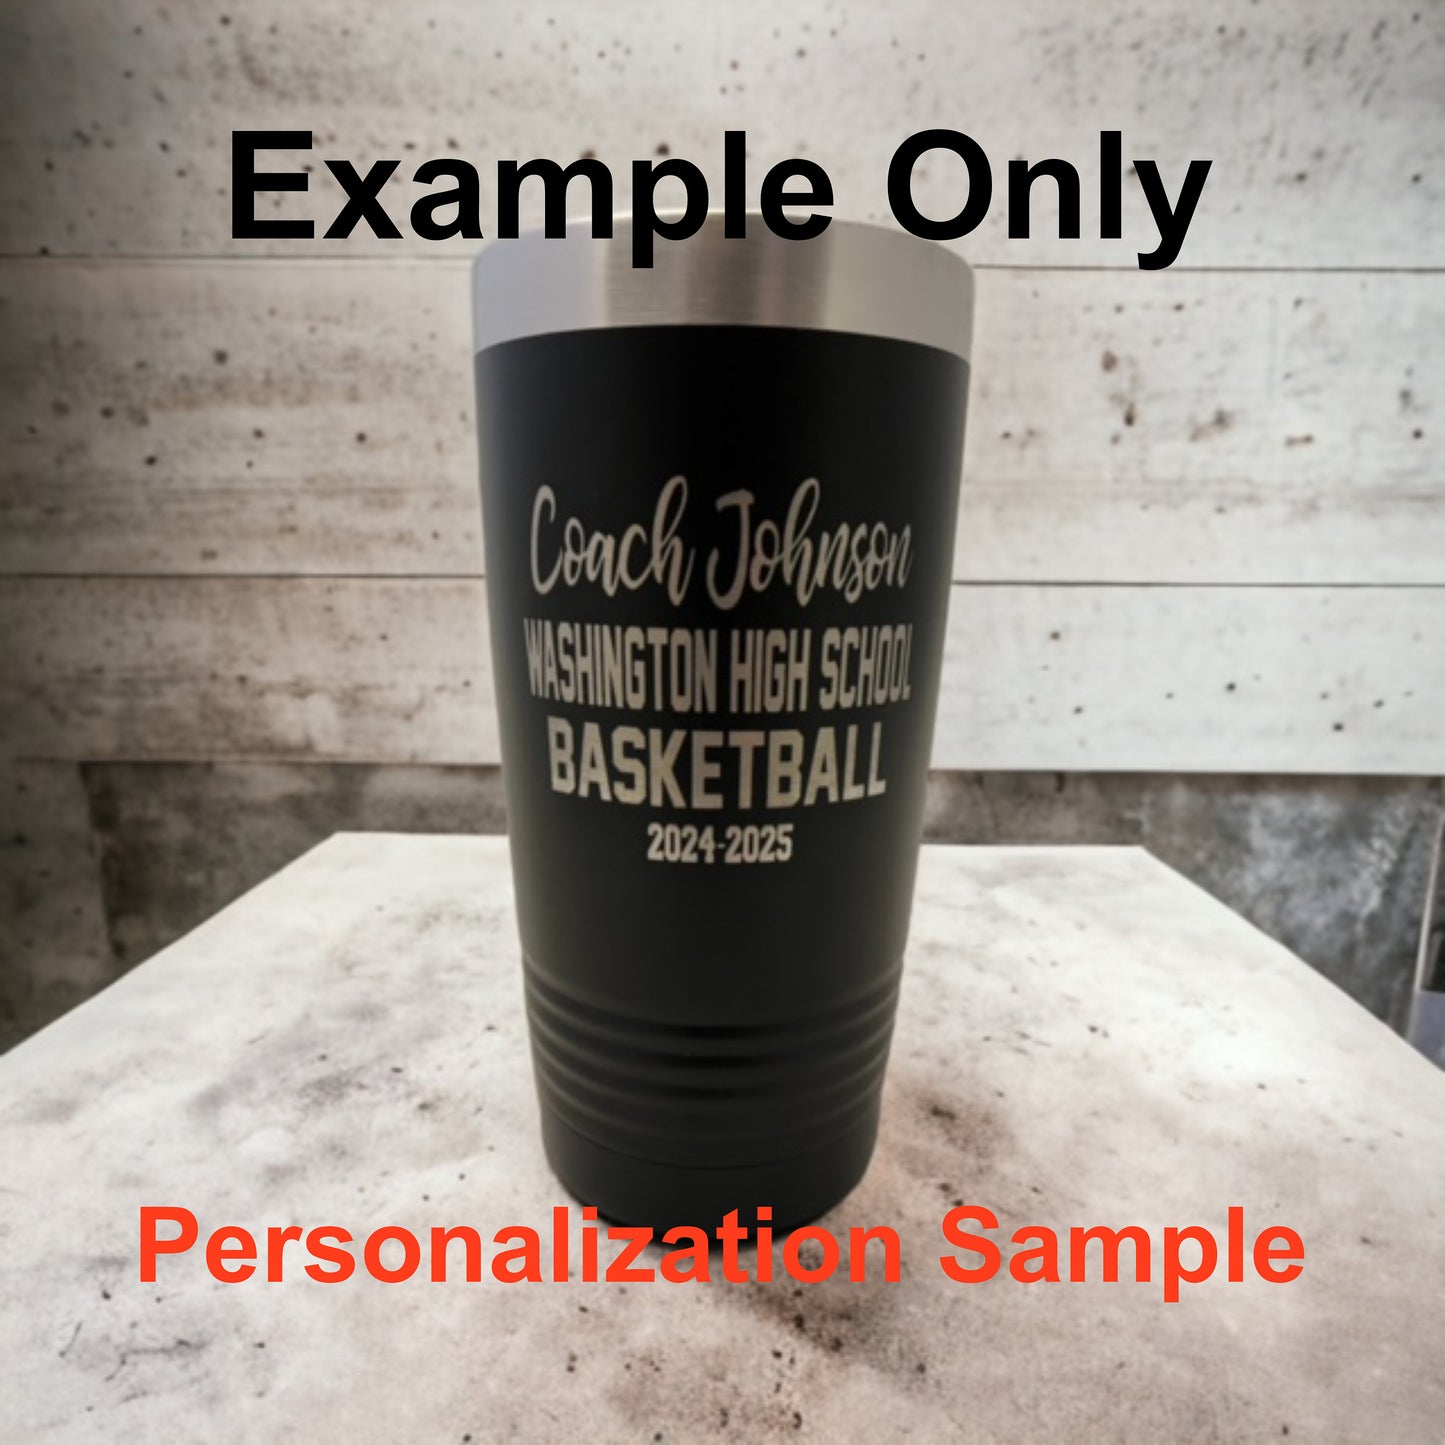 Field Hockey Coach Tumbler/ A Good Coach Can Change A Game/ Field Hockey Coach/ Engraved Both Sides/ Available Personalized/Coach Gift/20 oz